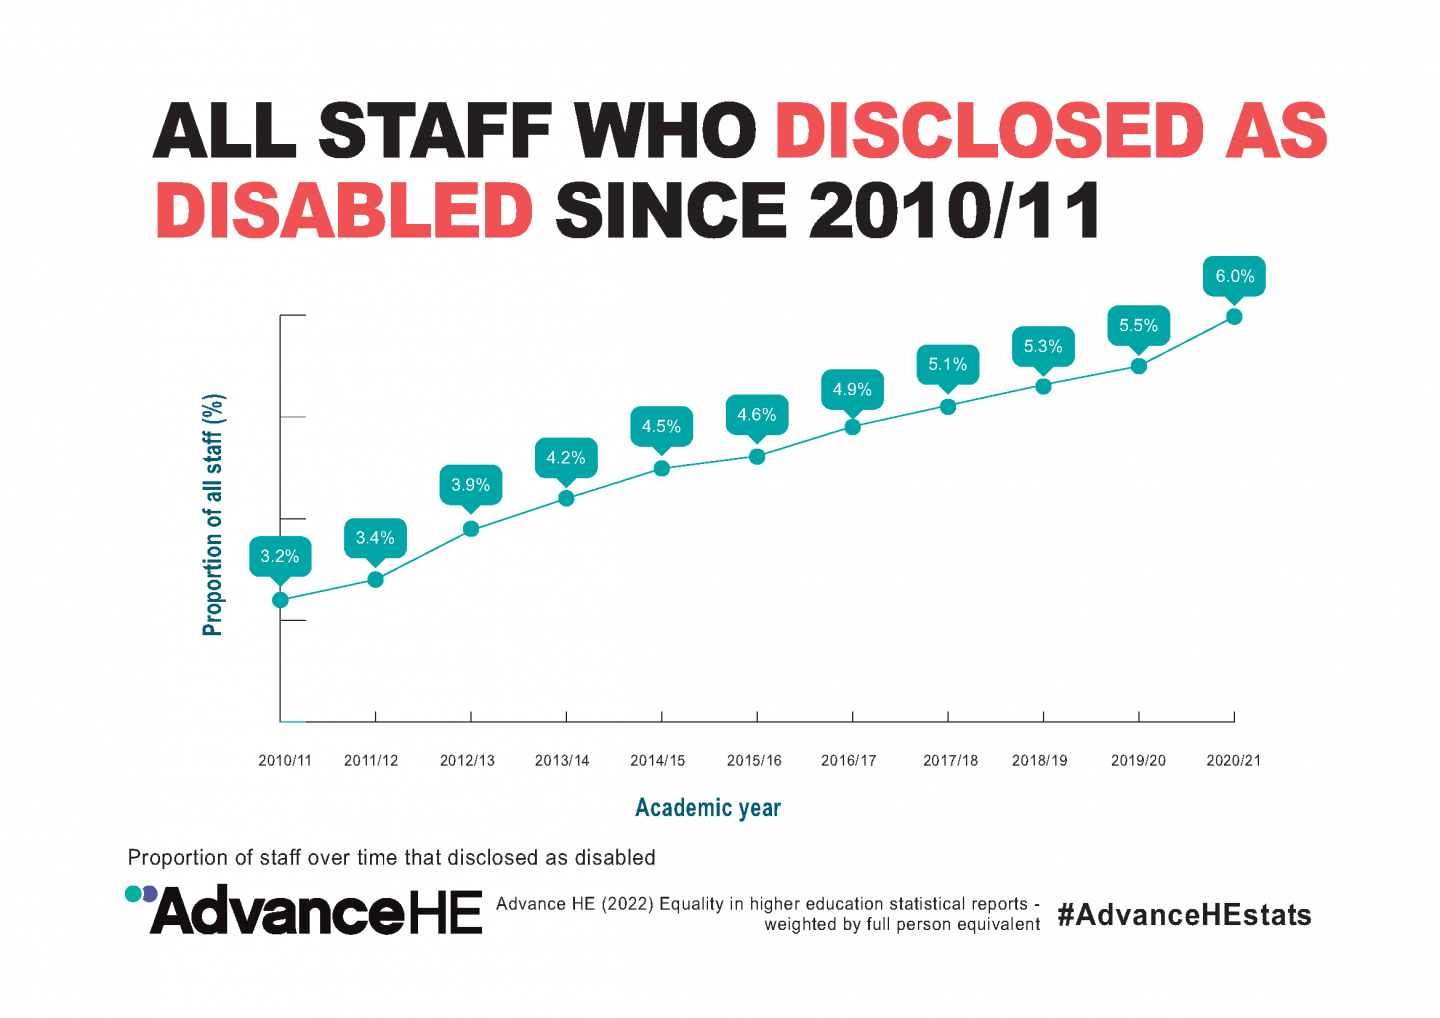 Staff disclosing as disabled